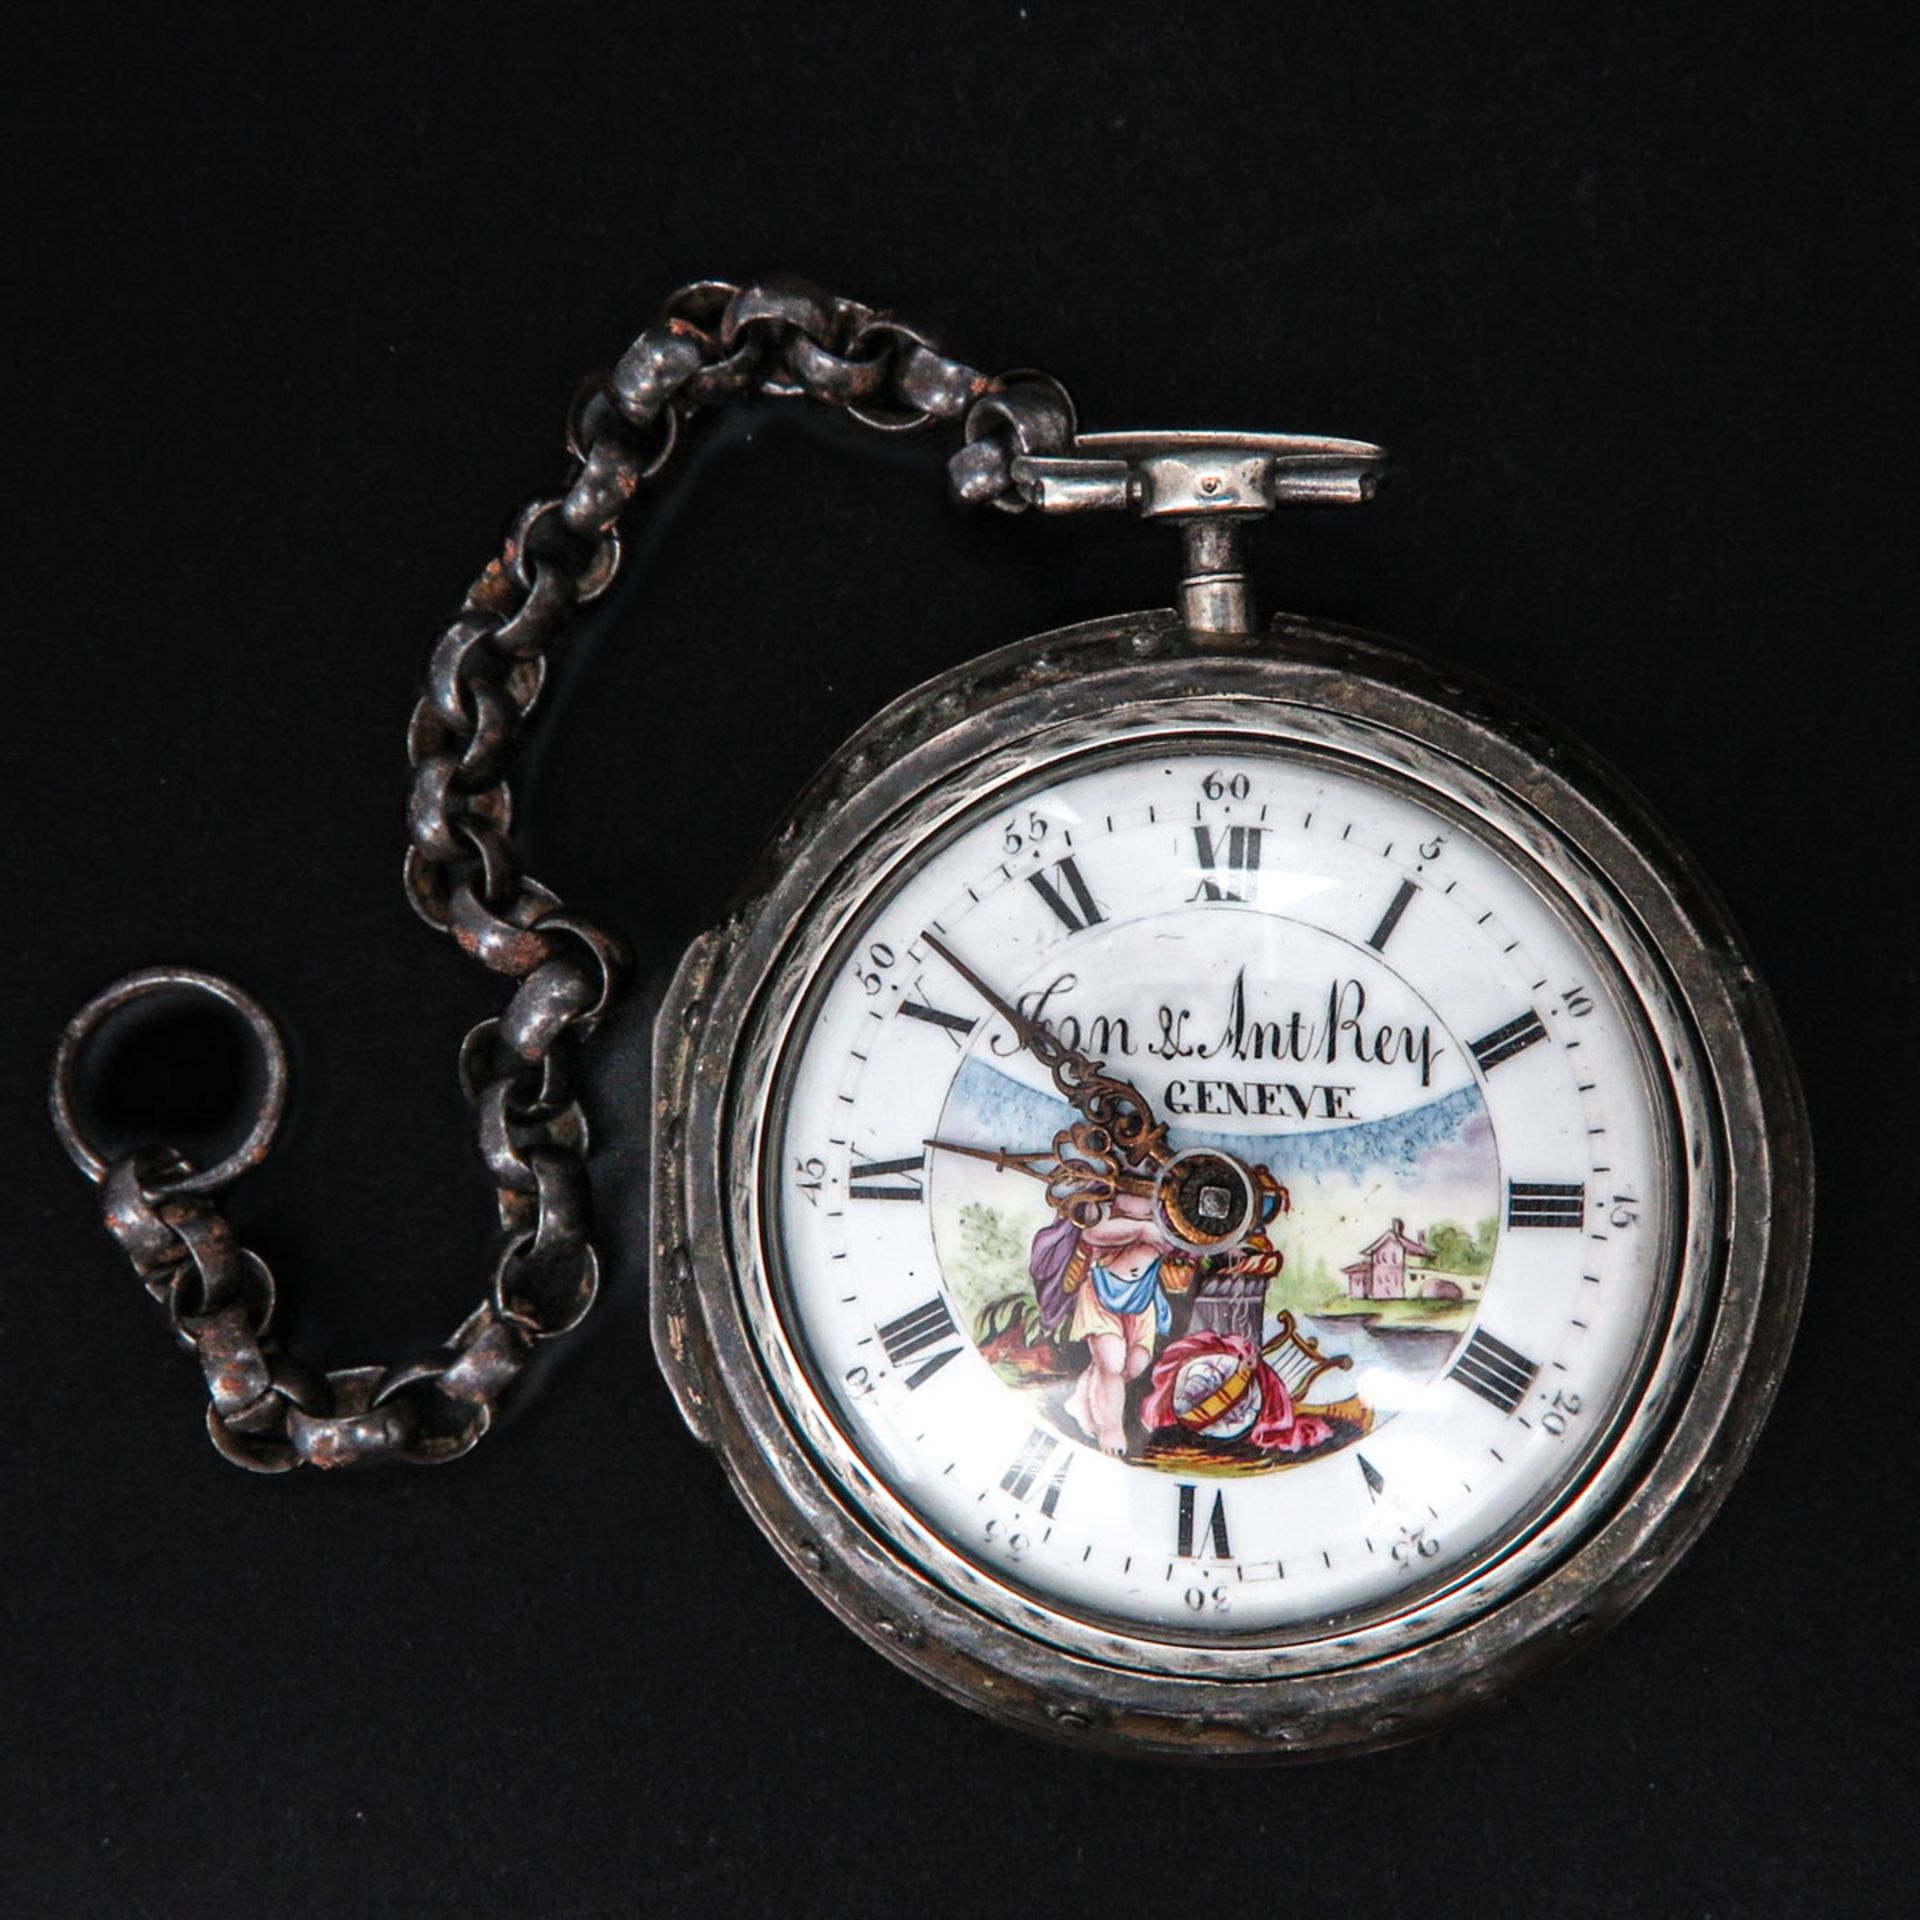 A Silver Pocket Watch Signed Jean & Ant Rey